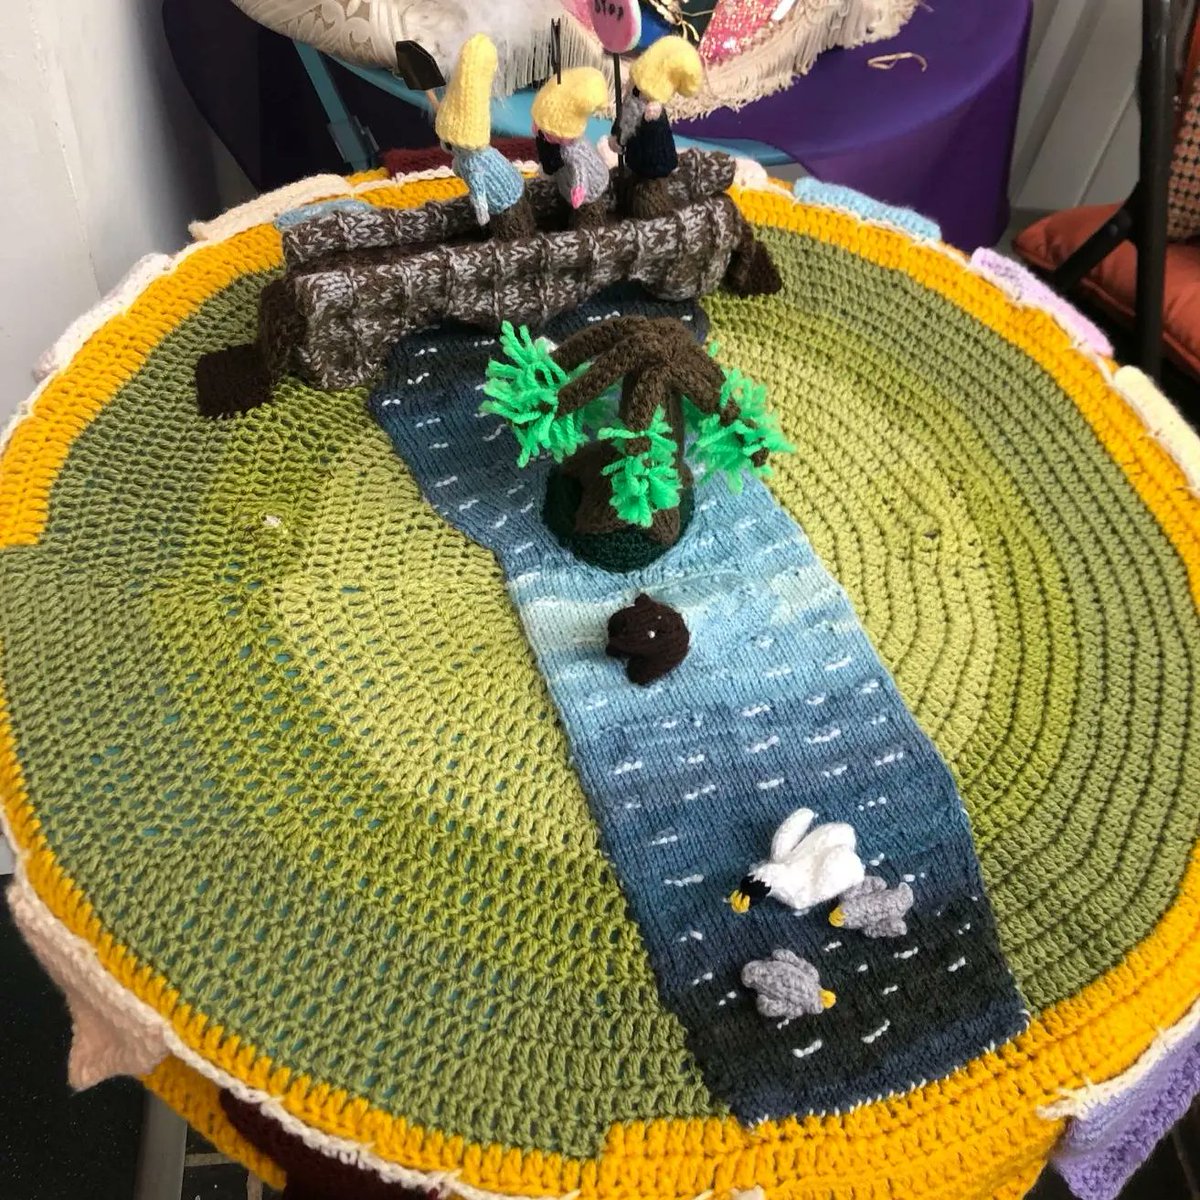 Loving the new postbox topper made by Liz in our In Stitches group, featuring Clopton Bridge and its recent repairs. A great yarn told in wool! In Stitches runs every Thursday 11am-12pm at the Escape Arts & Heritage Centre. @WestonFdn @ace_national @OurTownTrust